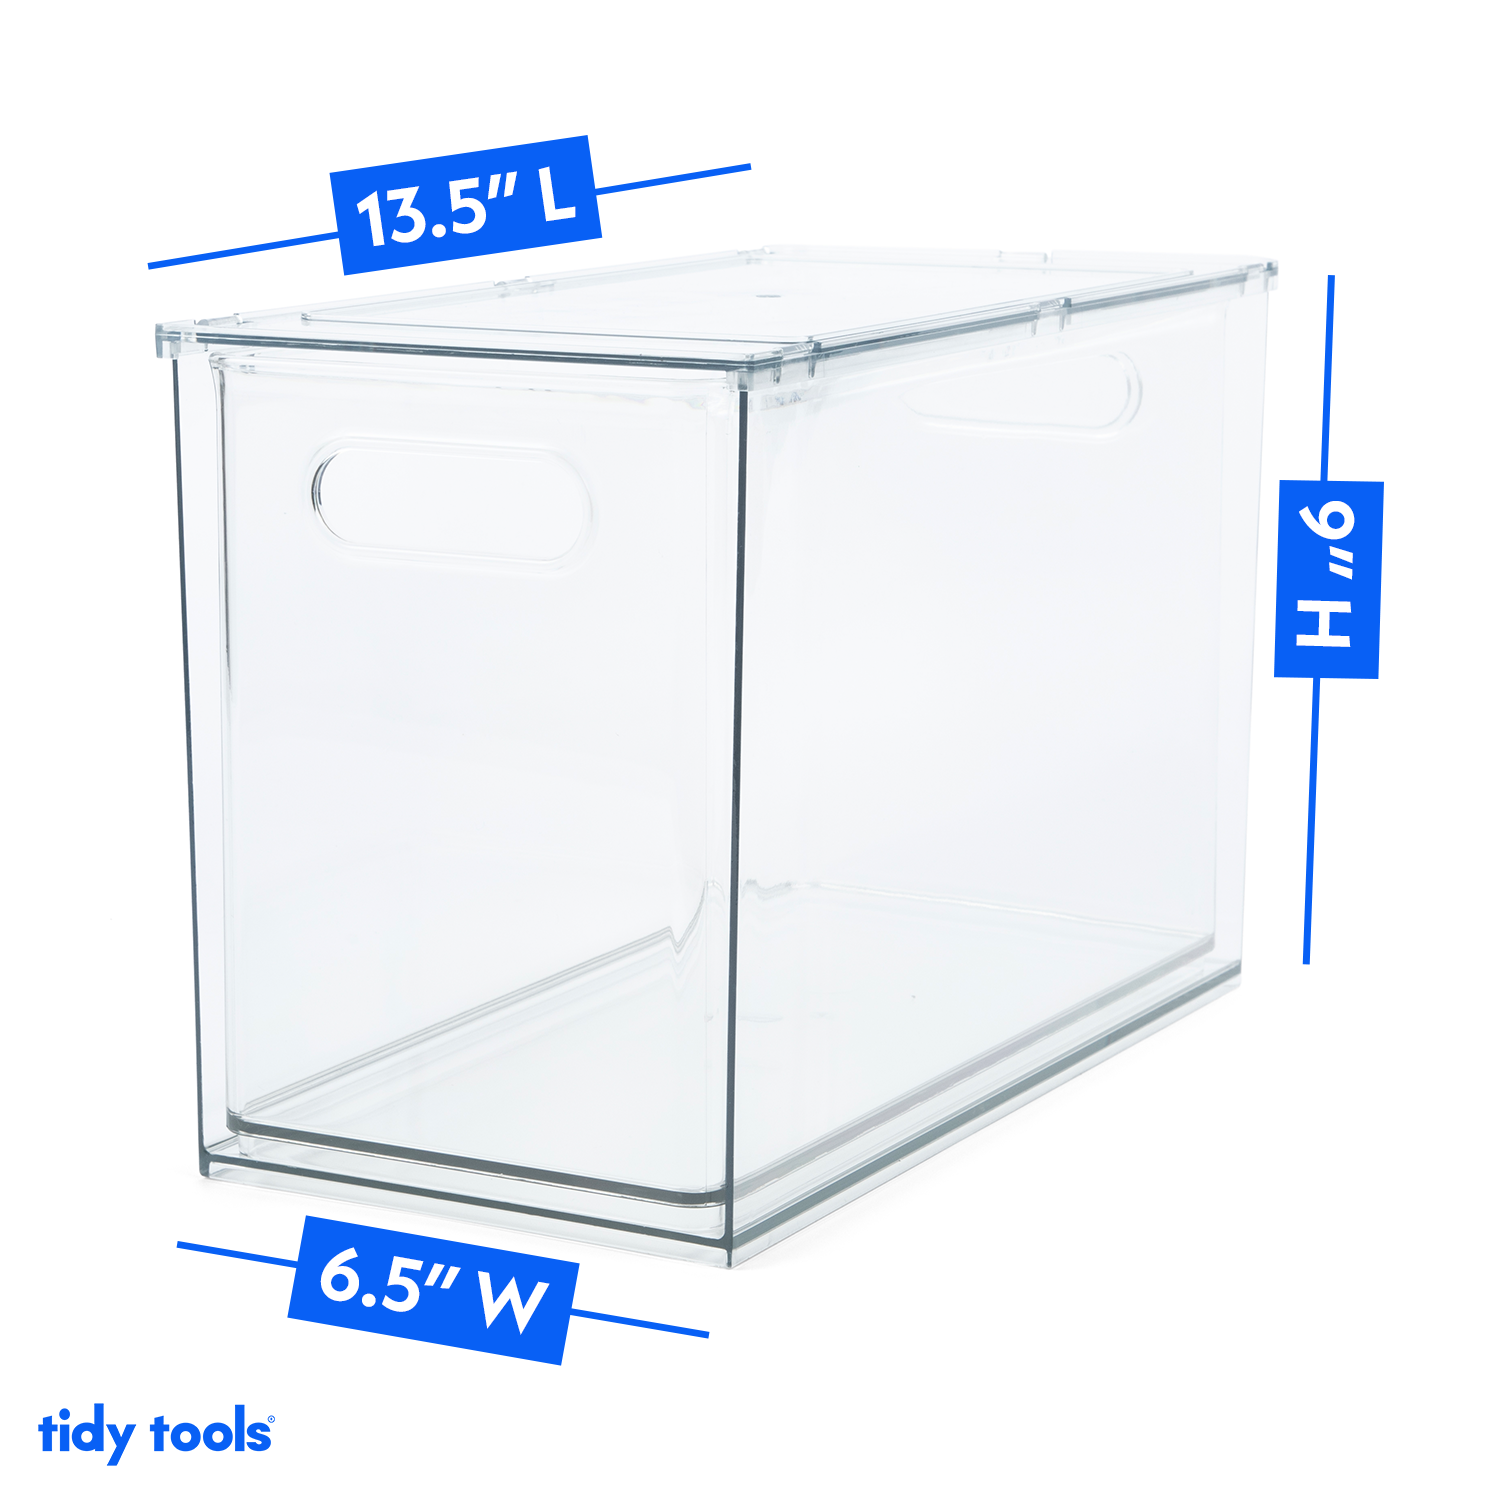 Tidy Tools Plastic Storage Bins With Pull-Out Drawer, 1 Pack